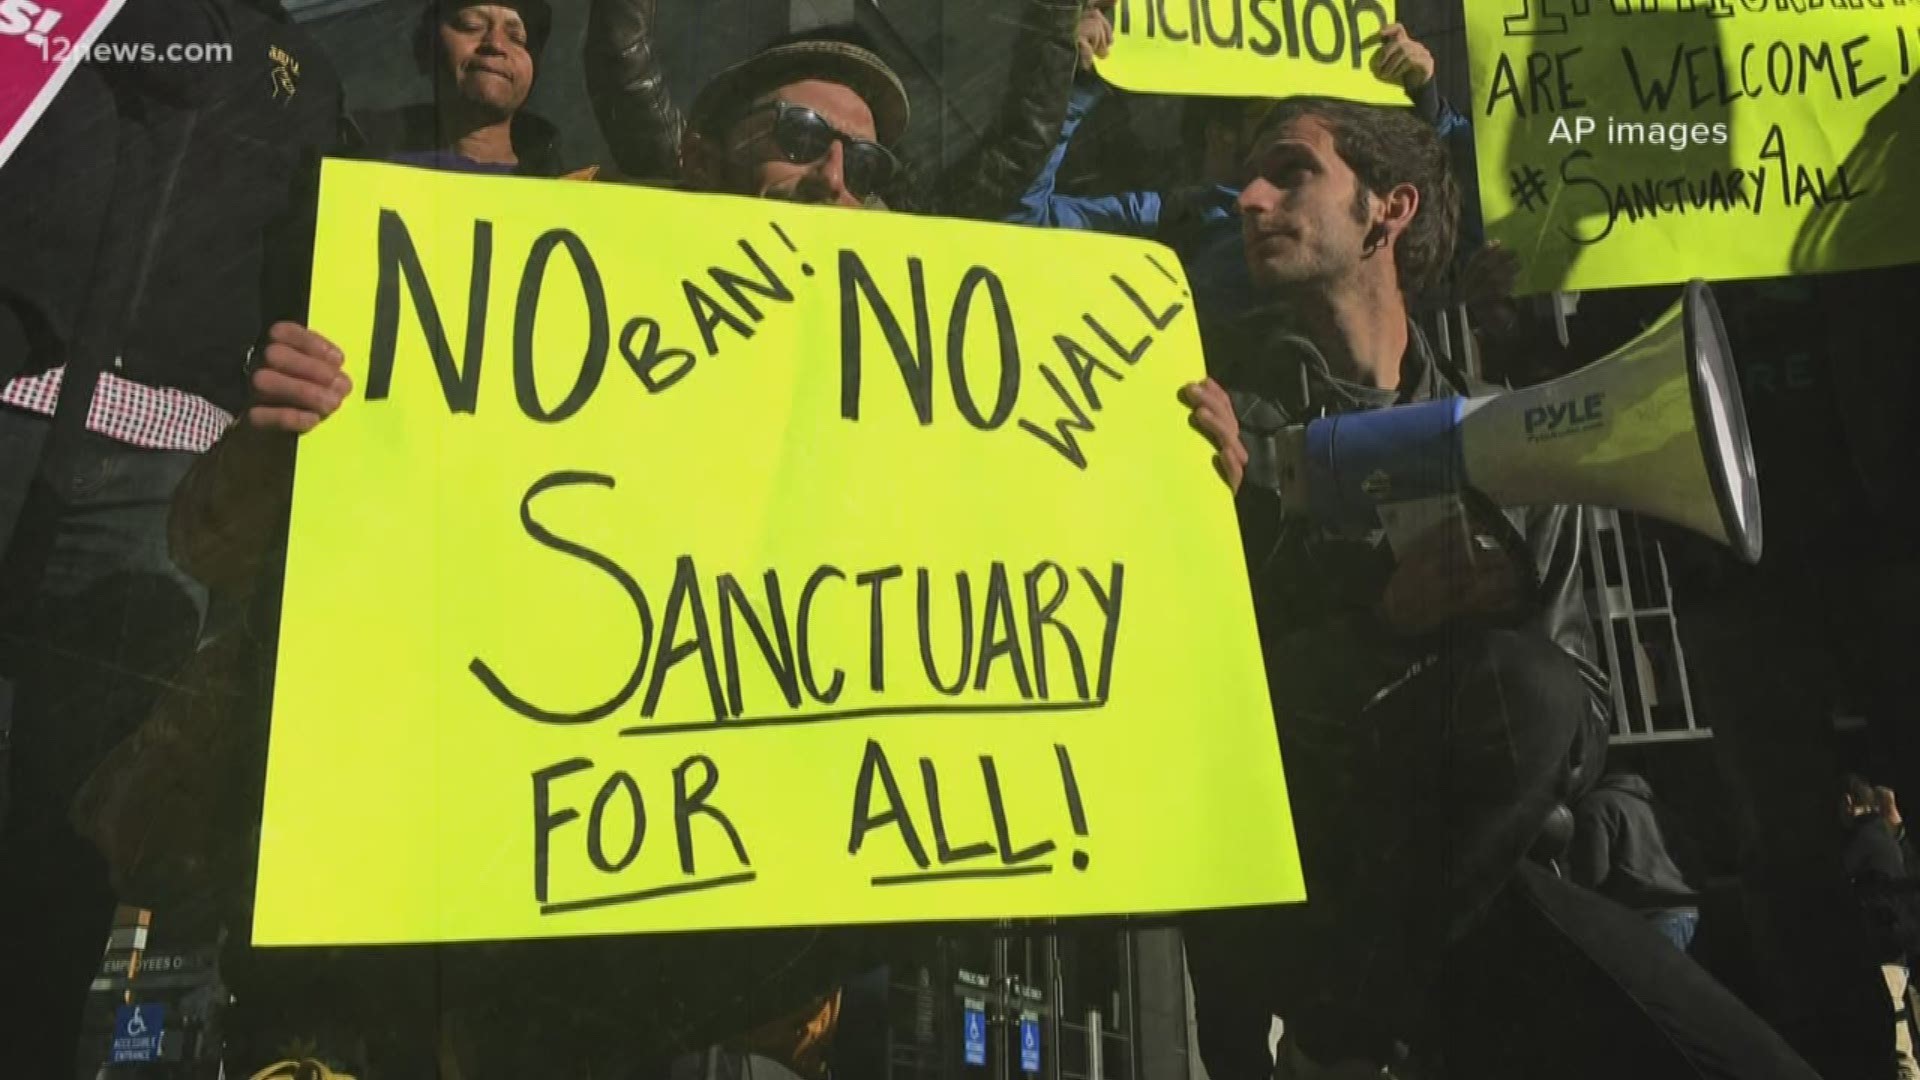 Arizona law already bans sanctuary cities. Governor Doug Ducey wants to put the ban into the Arizona state constitution and he wants you to vote on it.